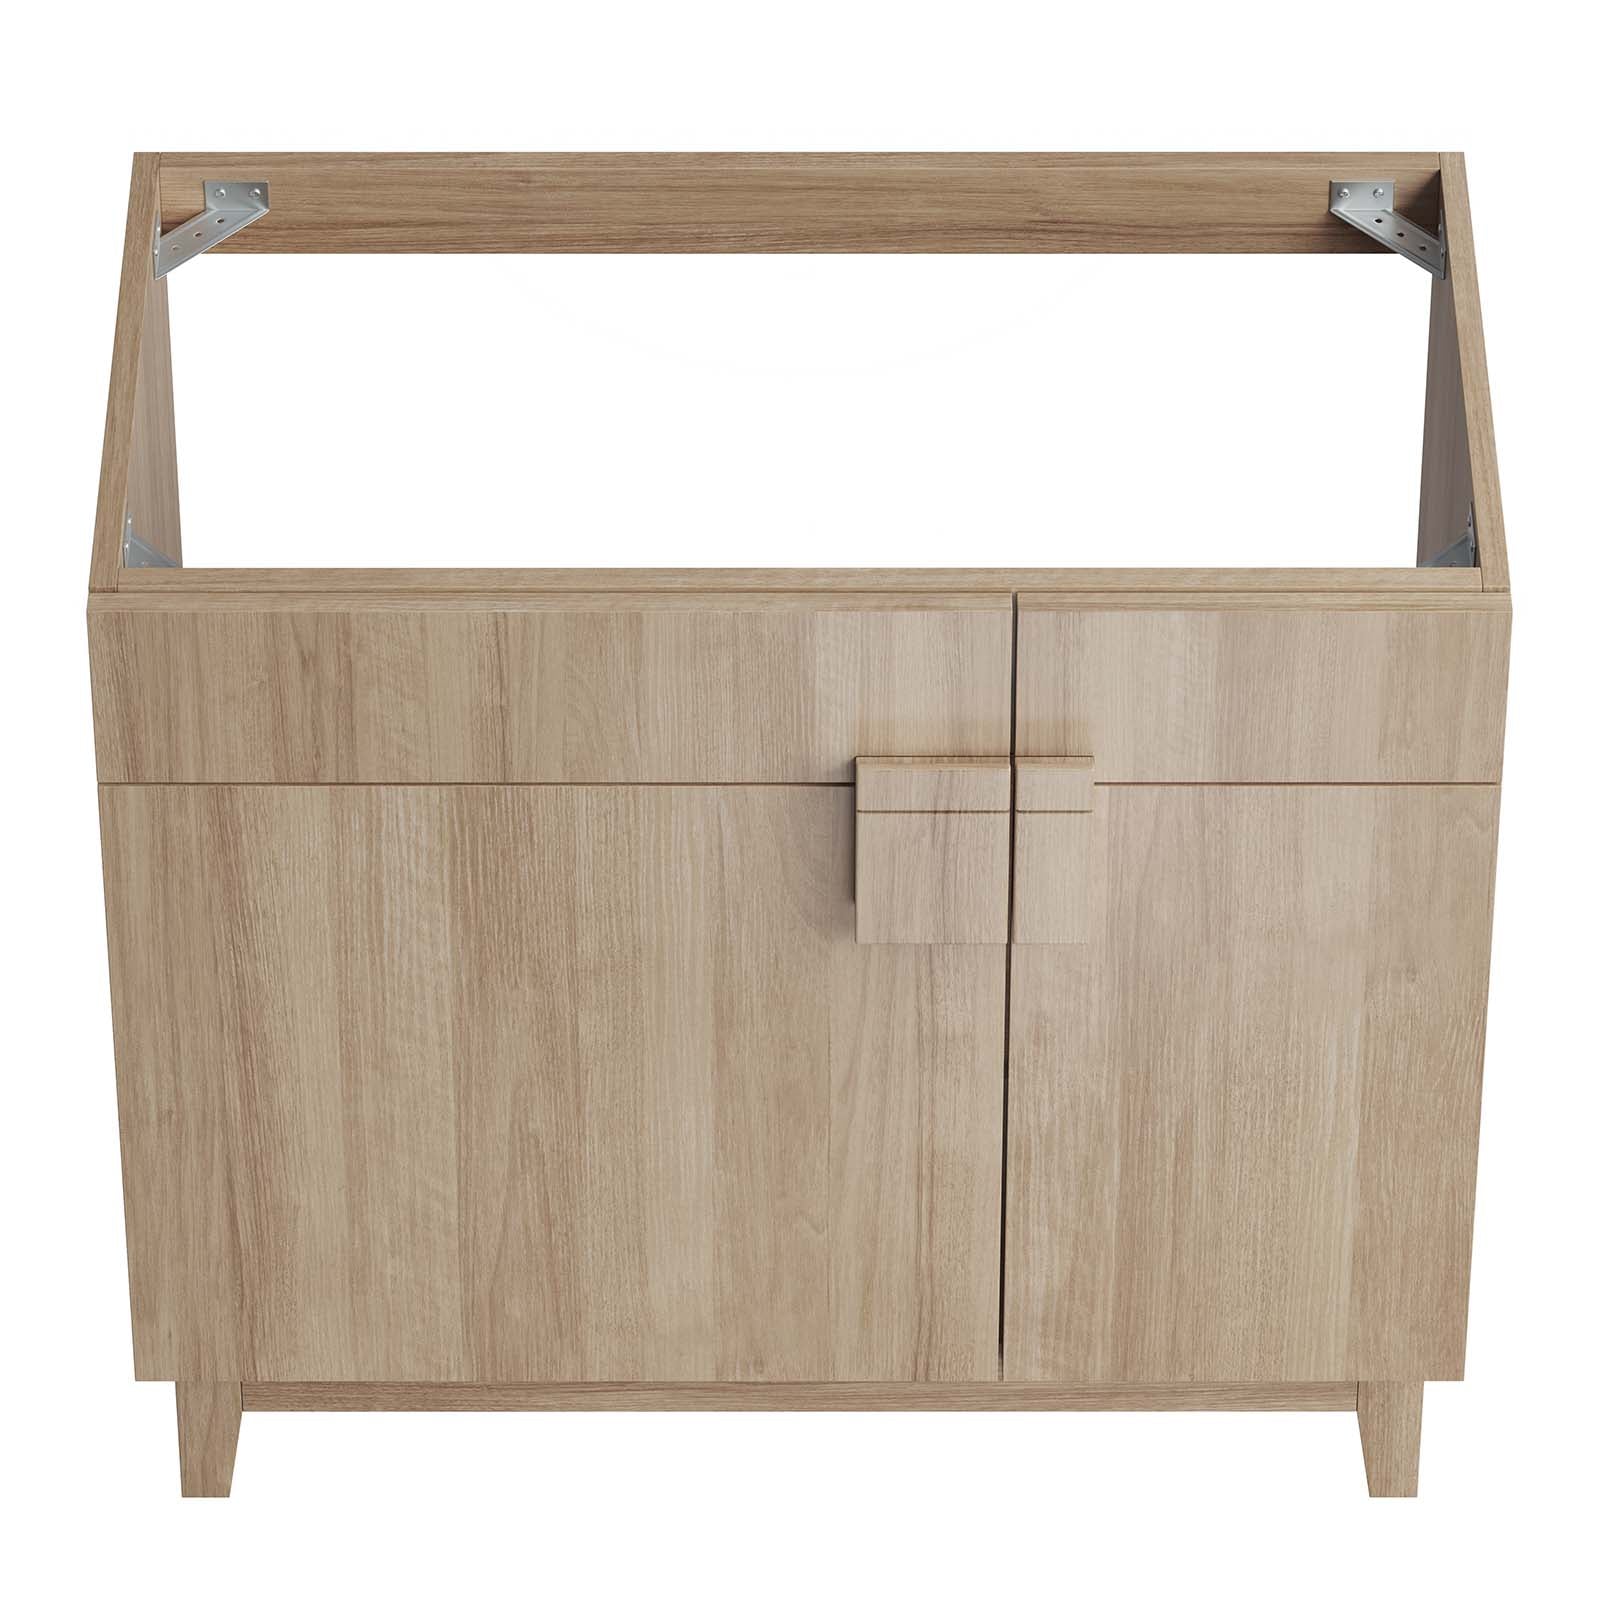 Miles 36” Bathroom Vanity Cabinet (Sink Basin Not Included) By Modway - EEI-6400 | Bathroom Accessories | Modway - 12